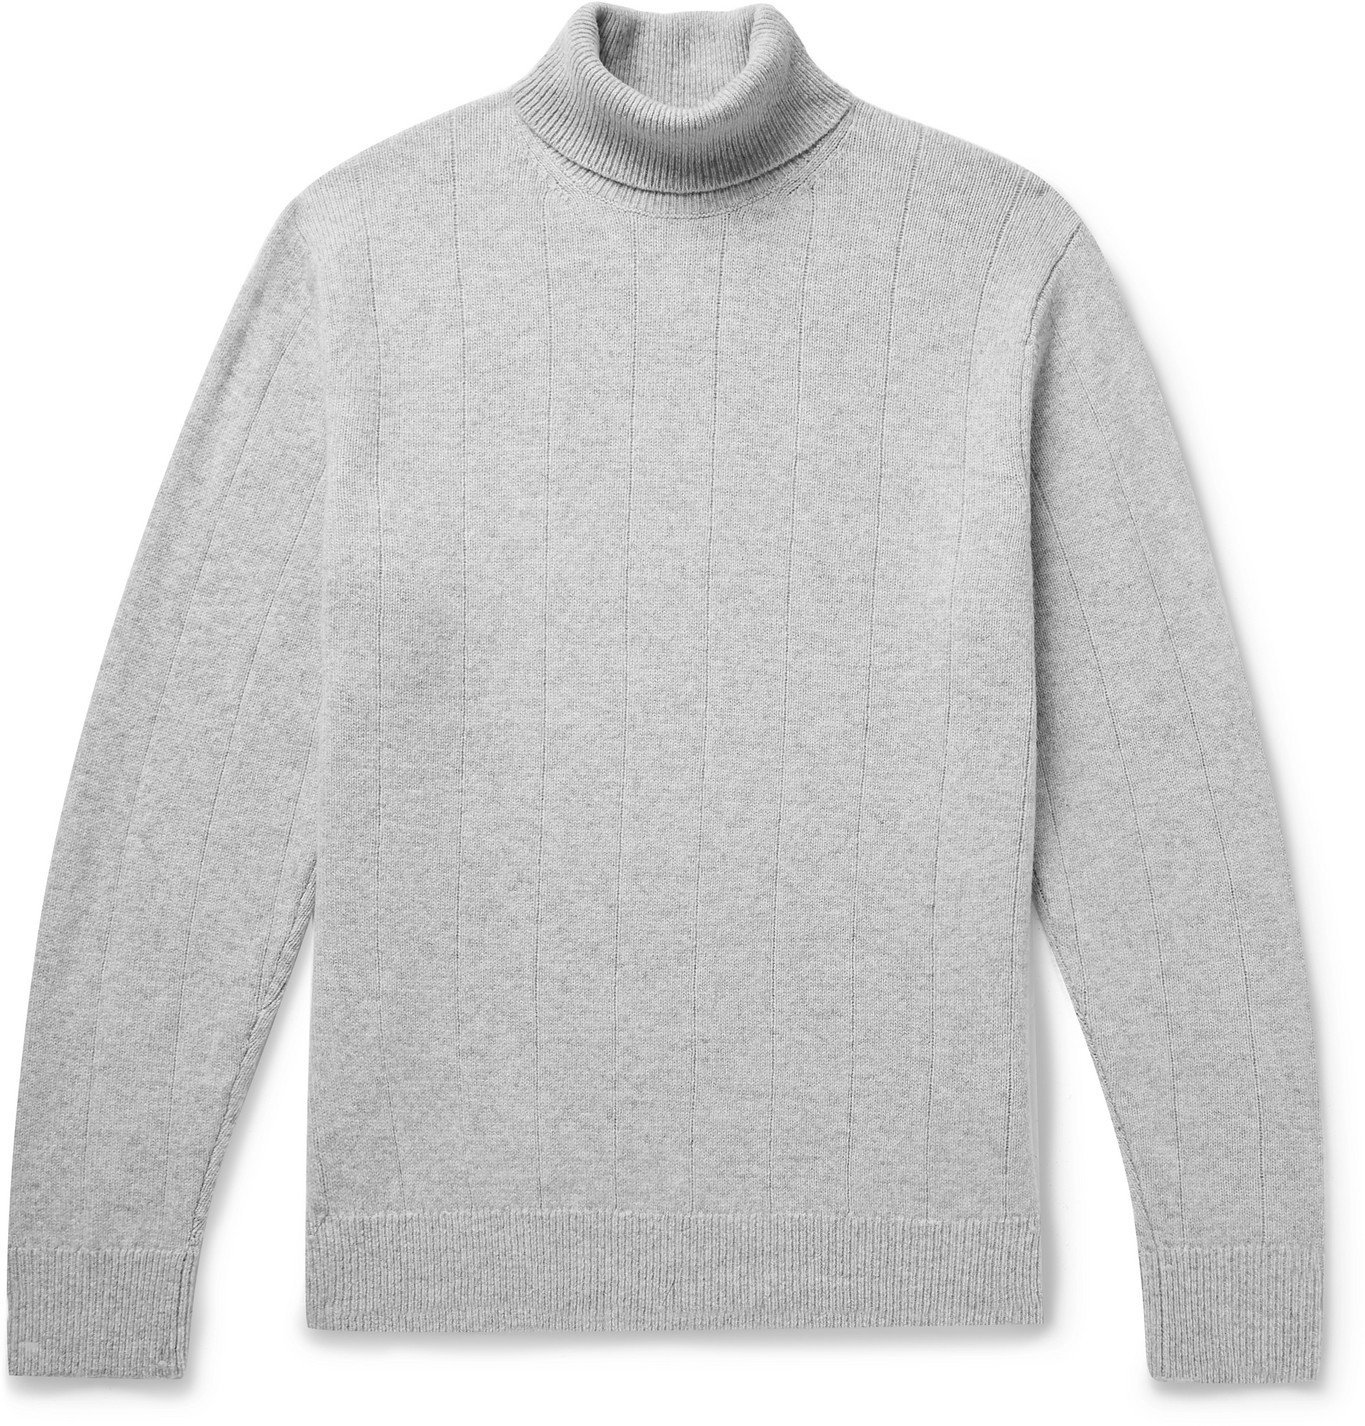 CLUB MONACO - Ribbed Mélange Wool and Cashmere-Blend Rollneck Sweater ...